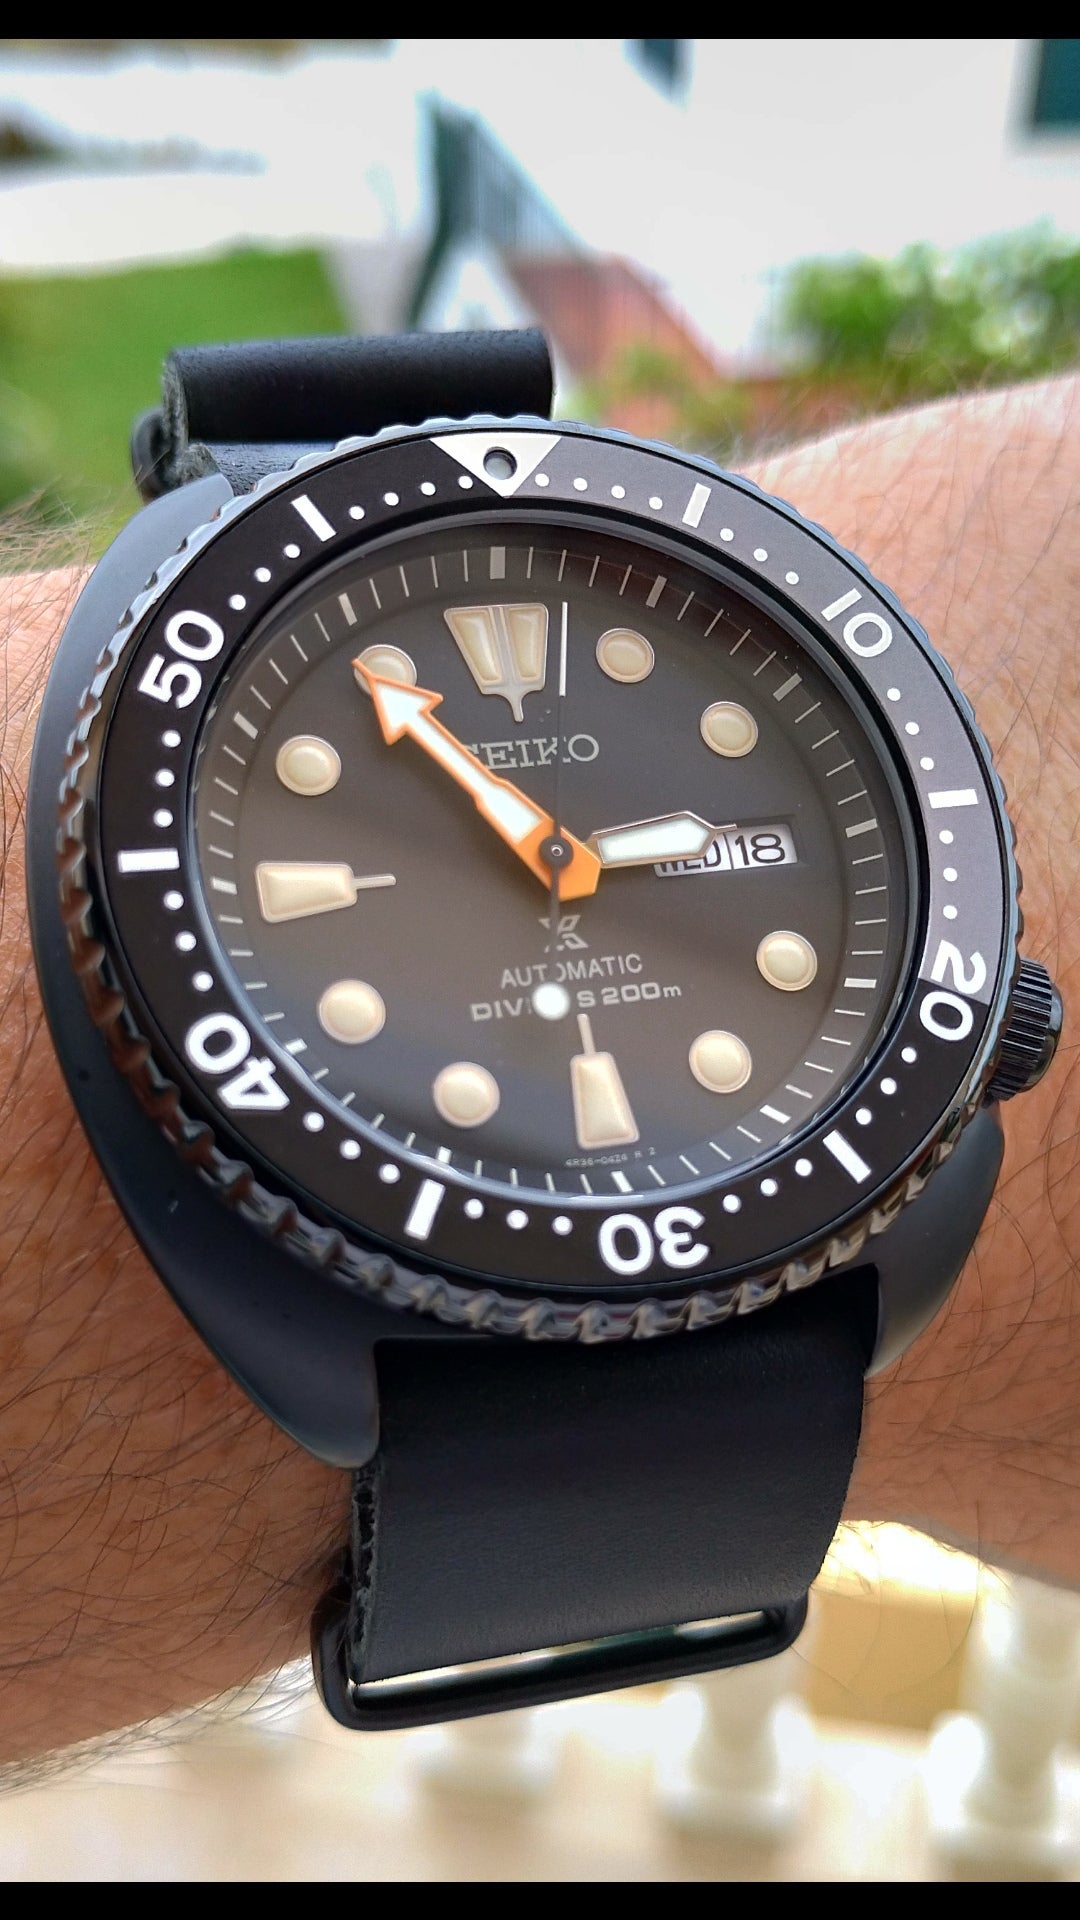 SRPC49K / SBDY005 PVD Turtle thread | Page 20 | WatchUSeek Watch Forums